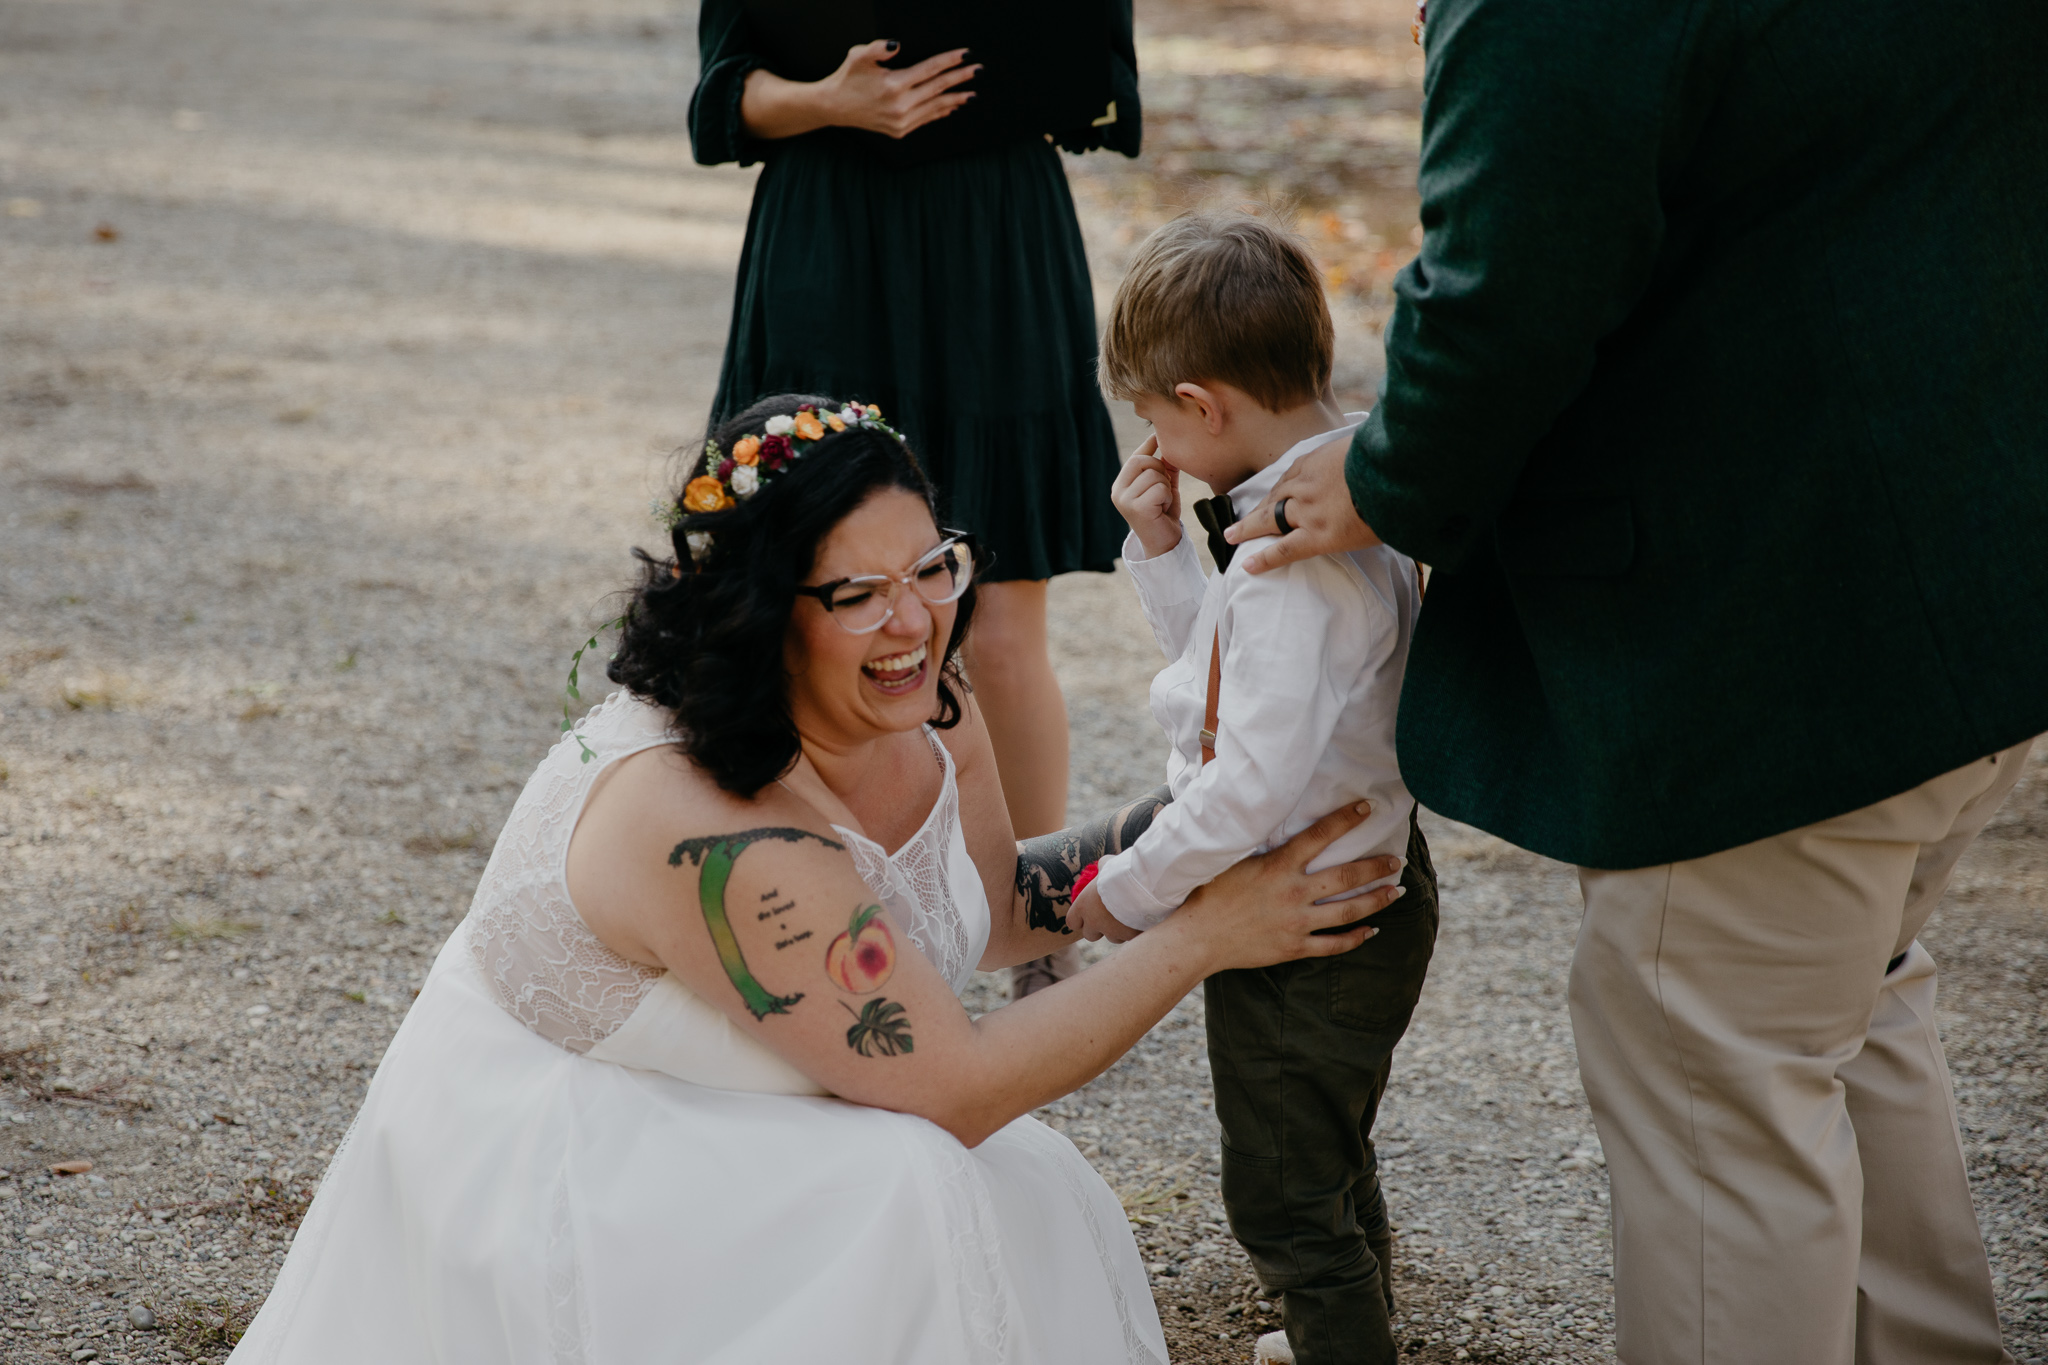 A bride laughs with her son after their fall elopement ceremony in Turkey Run Park